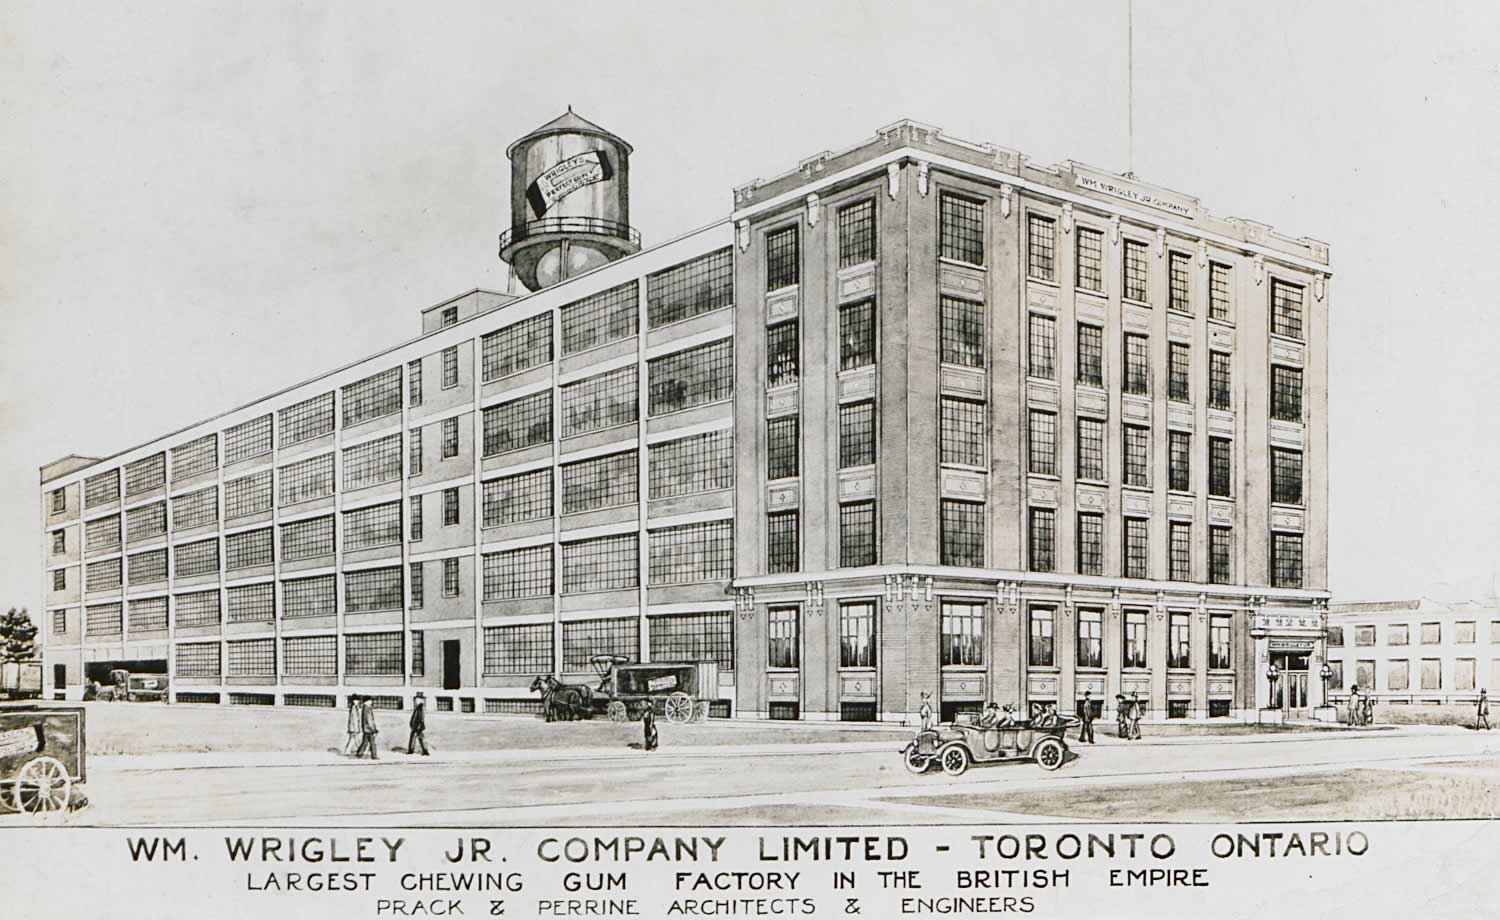 Black and white drawing of the Wm. Wrigley Jr. Co. factory in 1914. The building have five floors with large windows. Written below the drawing is the caption: 'Largest chewing gum factory in the British Empire; Prack & Perrine Architects and Engineers'.